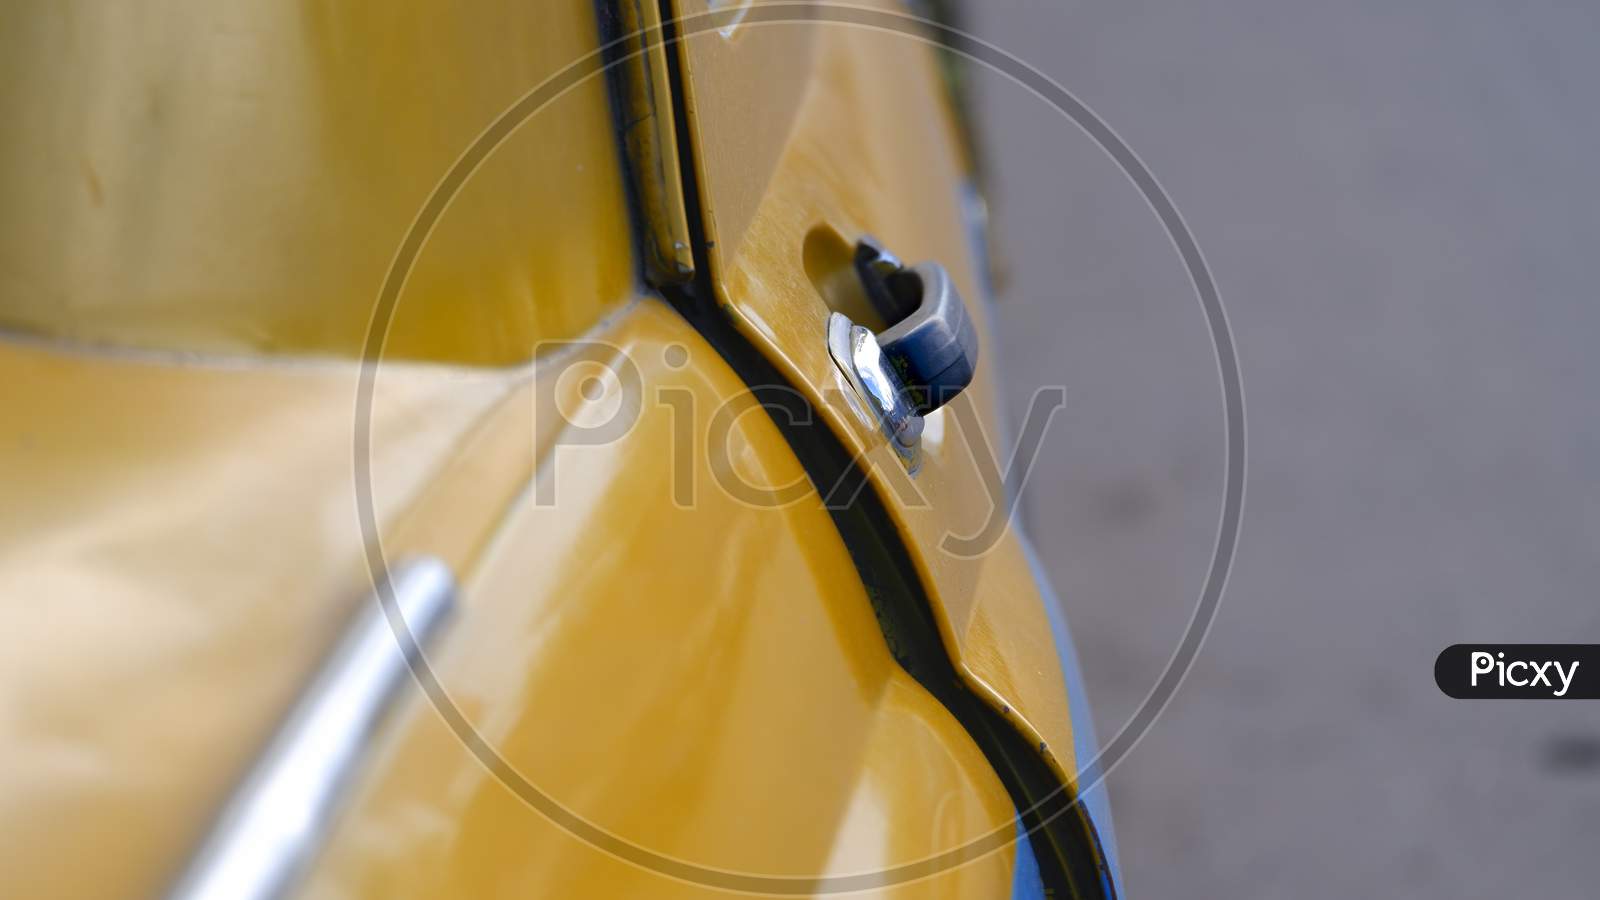 Close Up Image Of Black Door Handle Of Famous Yellow Taxi In Kolkata.